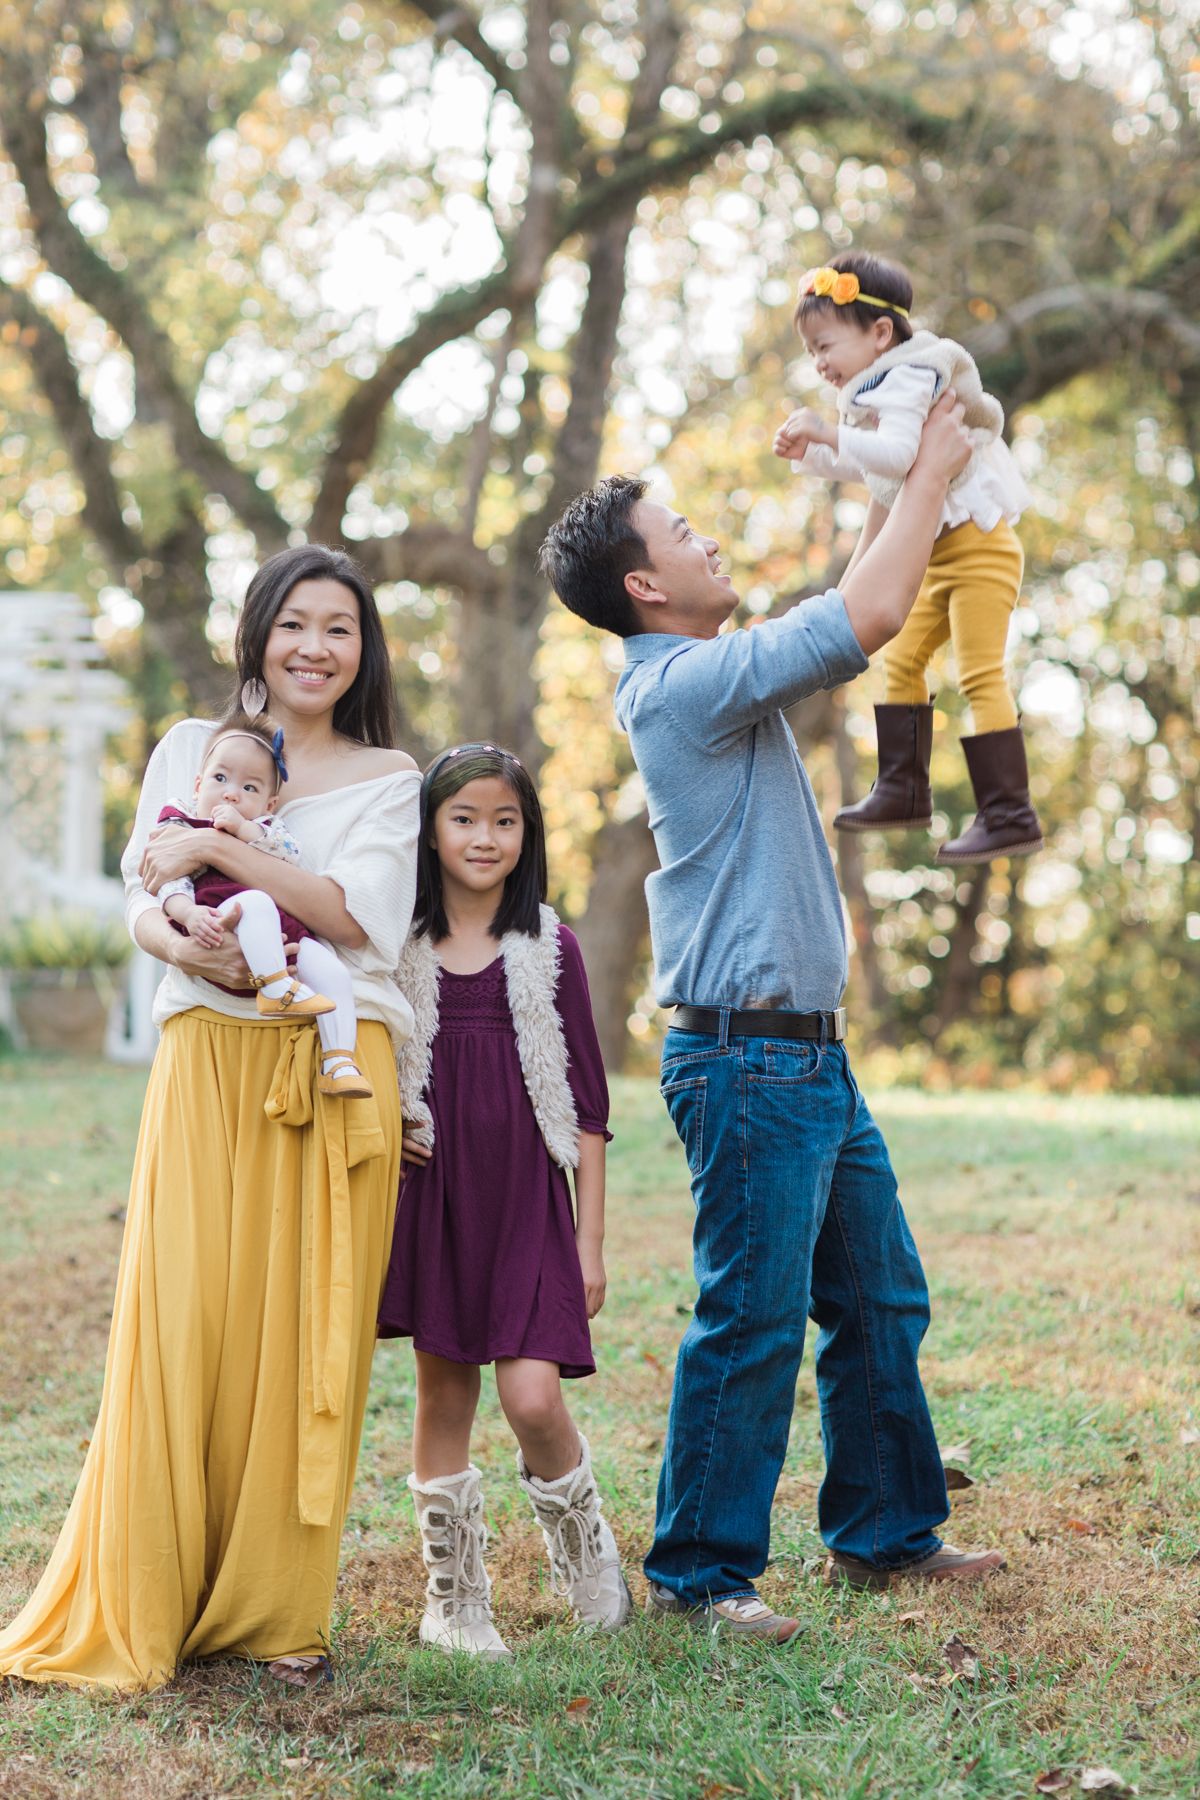 Contrast and colors. 70+ Best Family Photoshoot Outfit Ideas That You Must Check - 3